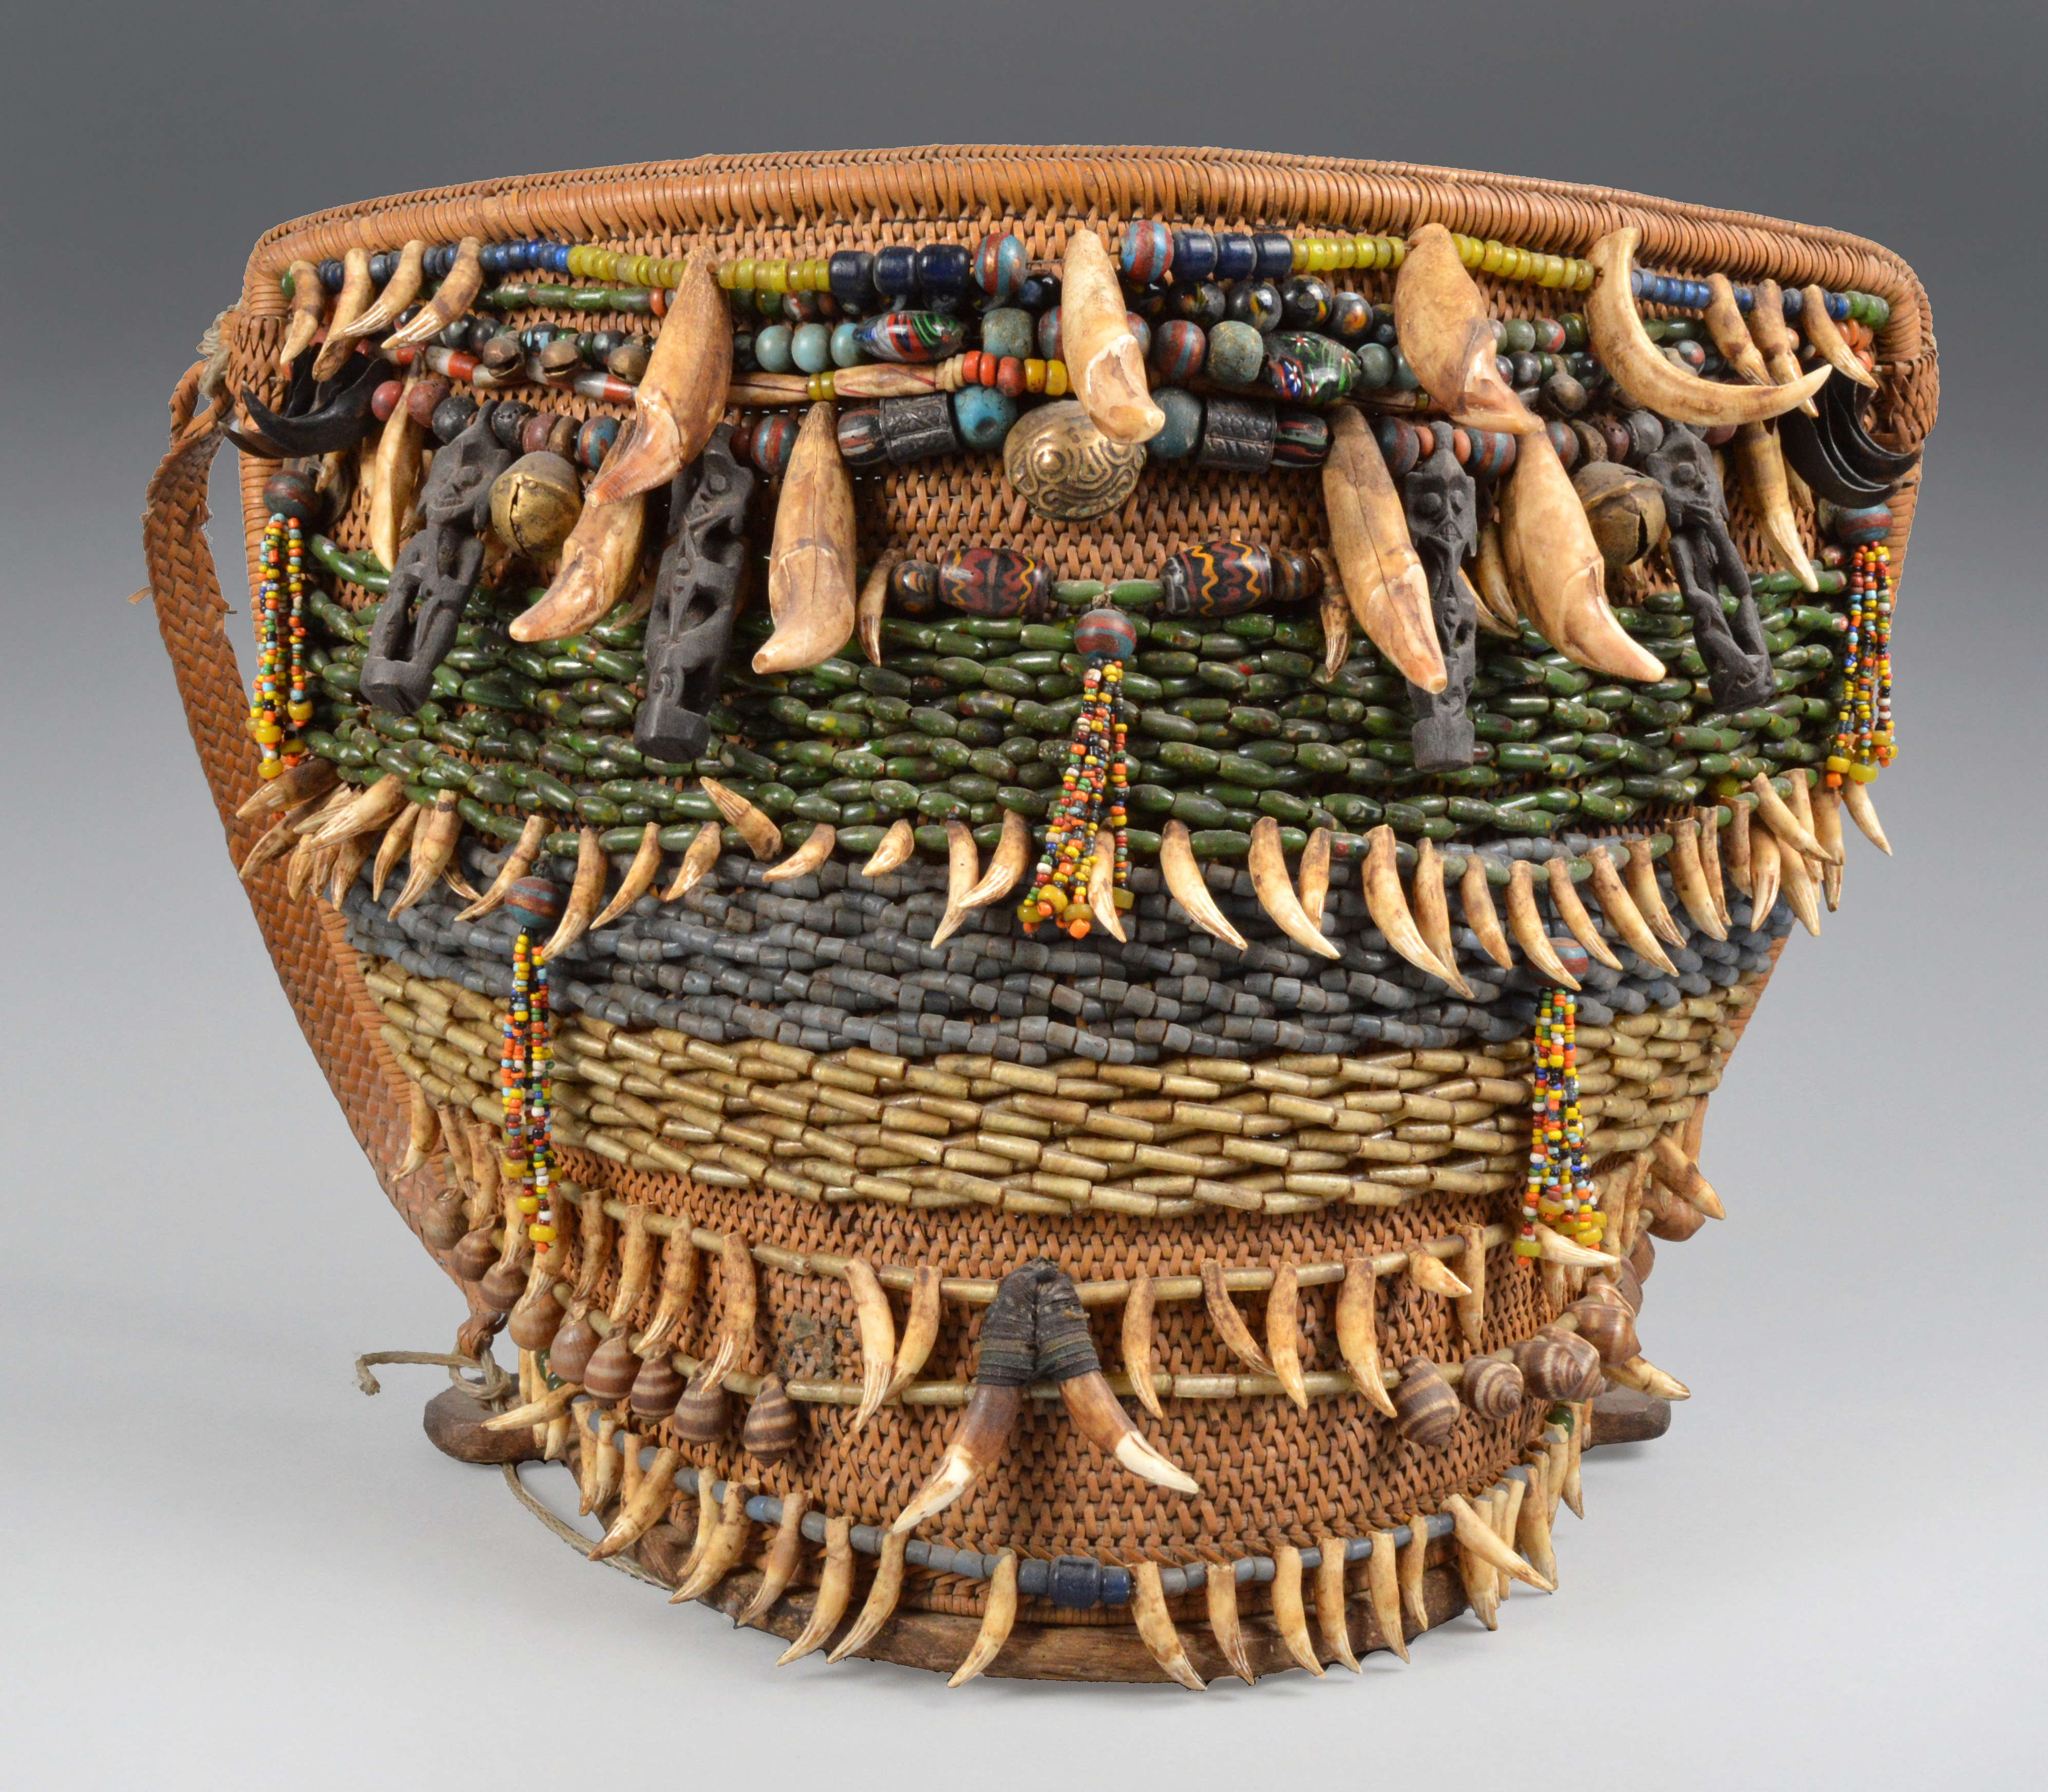 A Dayak baby carrier Borneo, Indonesia the basketry back hung with strings of glass beads, teeth,